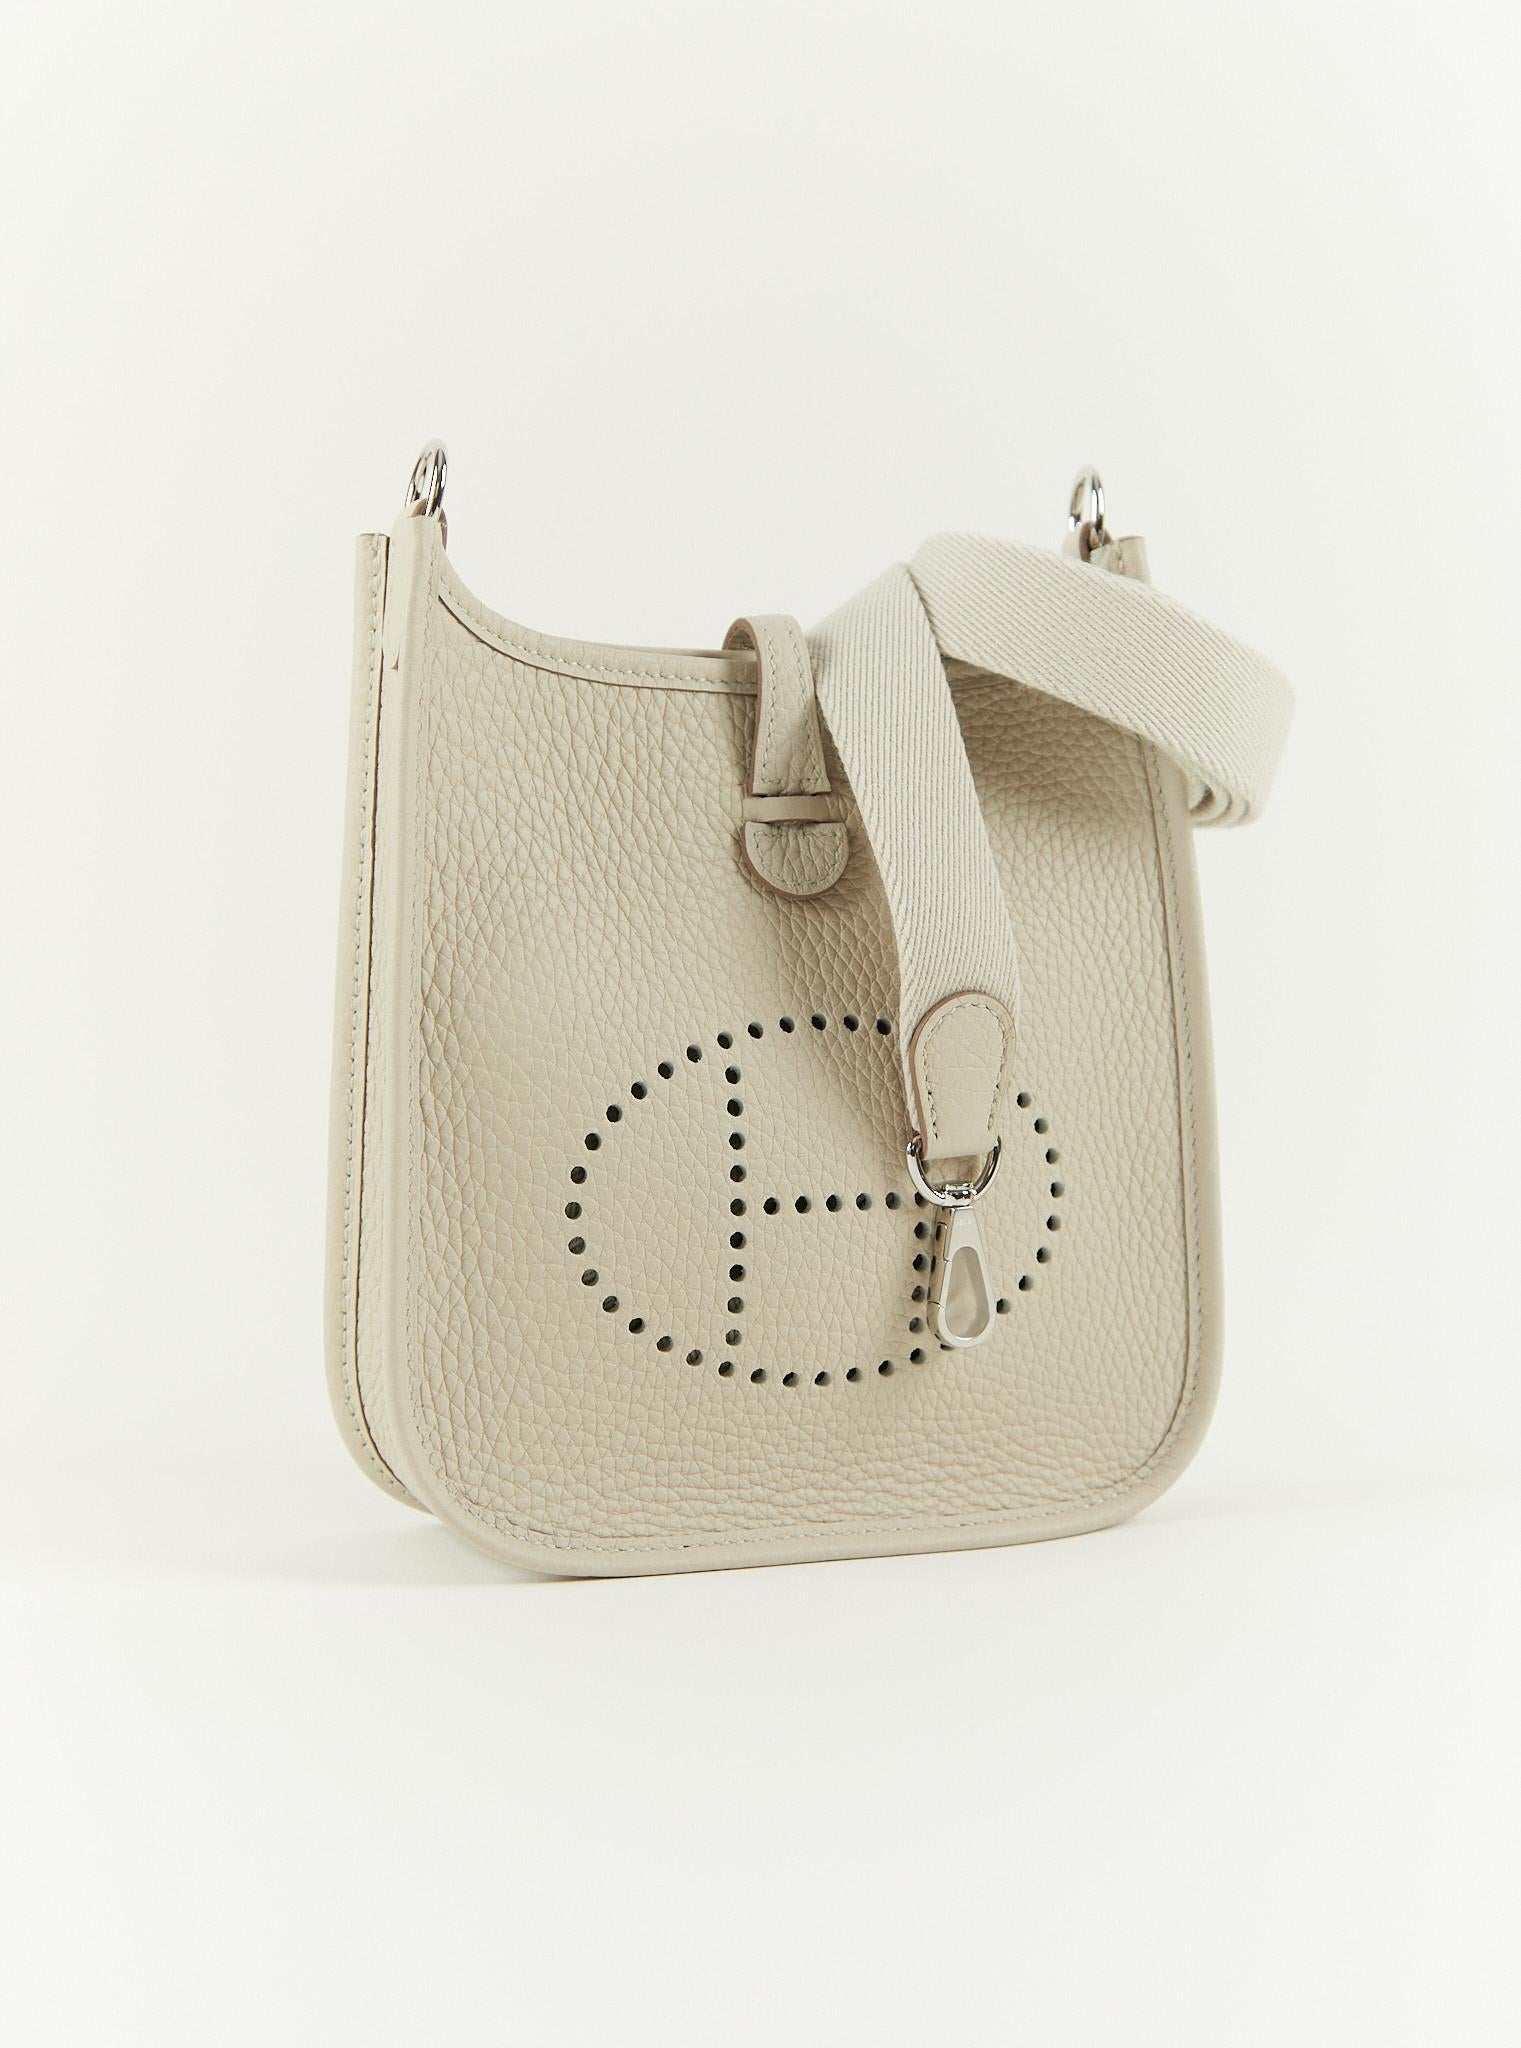 Hermès Mini Evelyne TPM in Beton

Clemence Leather with PalladiumHardware

Canvas Shoulder/Crossbody strap

B Stamp

Accompanied by:  Hermes box, Hermes dustbag, shoulder strap, shoulder strap dustbag and ribbon

Measurements: W 6.75